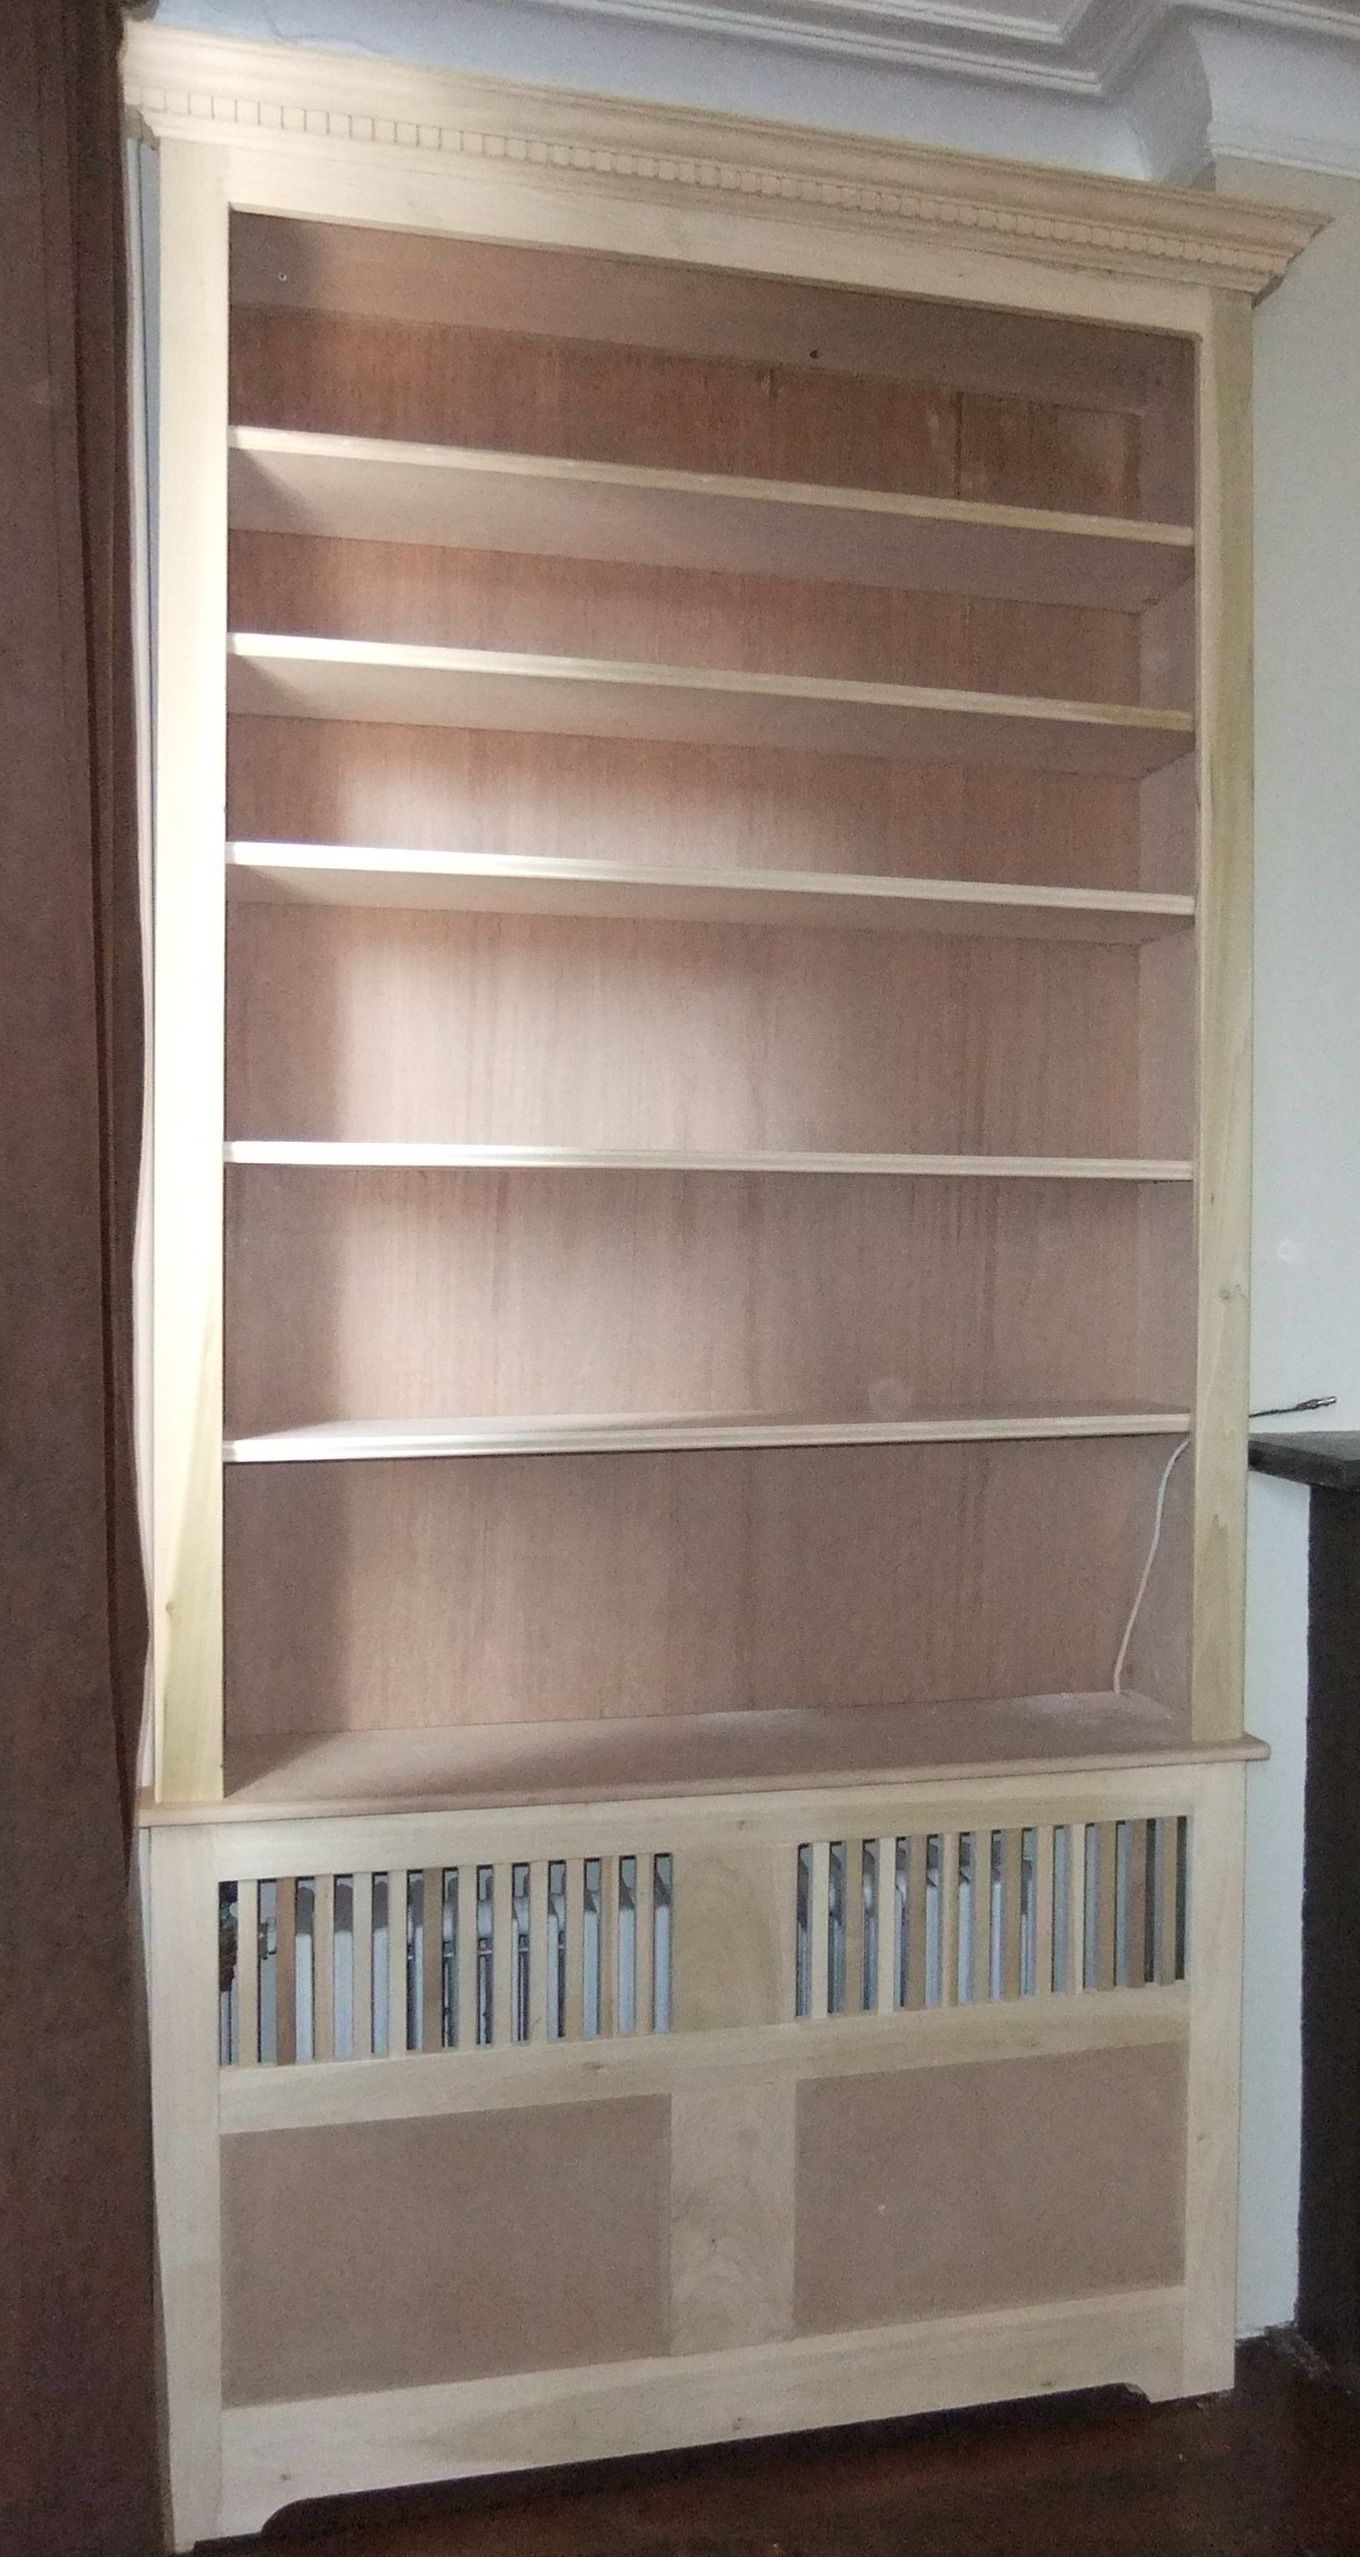 Tomkat Fine Woodworking Photo Gallery Of Cabinets And Organizers With Radiator Cover Shelf Unit (View 11 of 15)